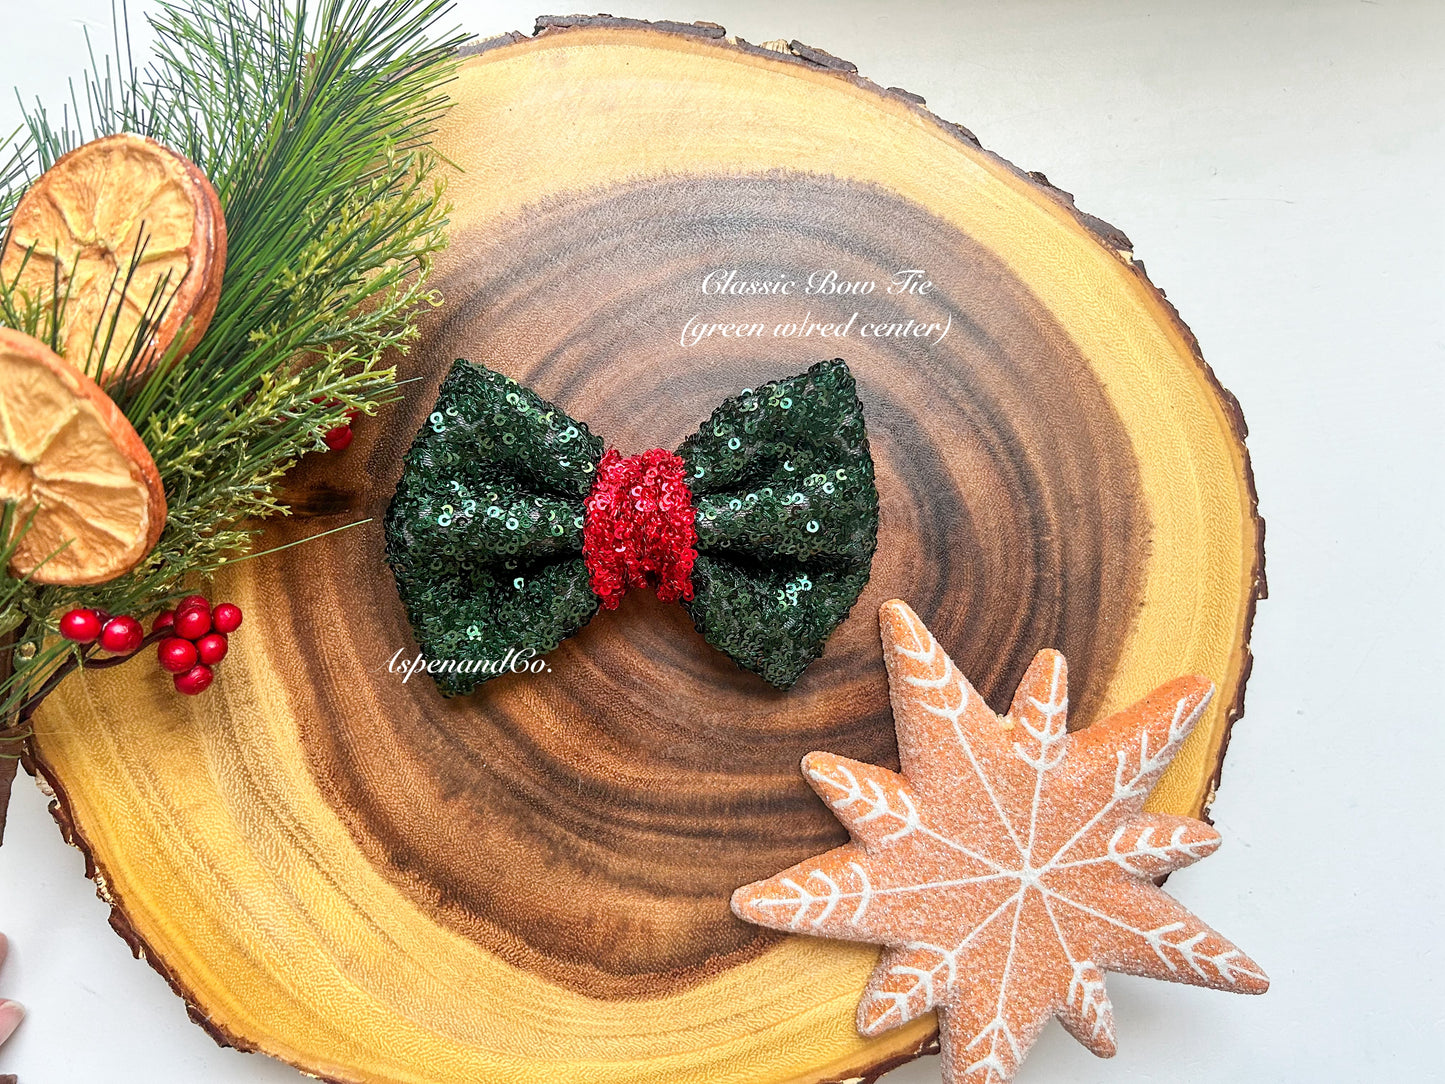 Fluffy Dog Collar Bow Tie - Christmas Sparkle (you choose style)